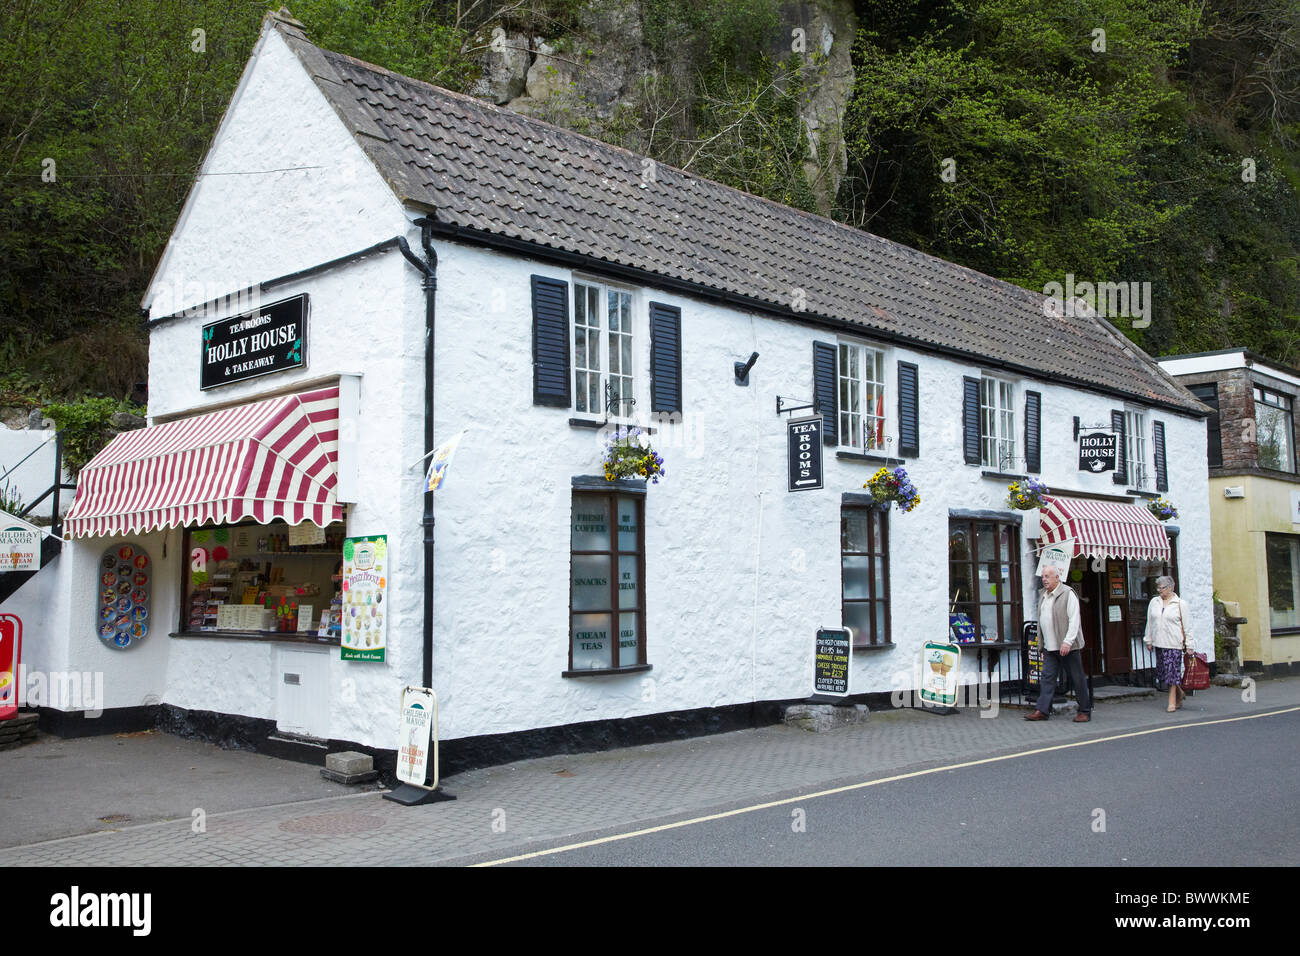 Holly House Tea Rooms and Takeaways, Cheddar Village, Somerset, England, United Kingdom Stock Photo